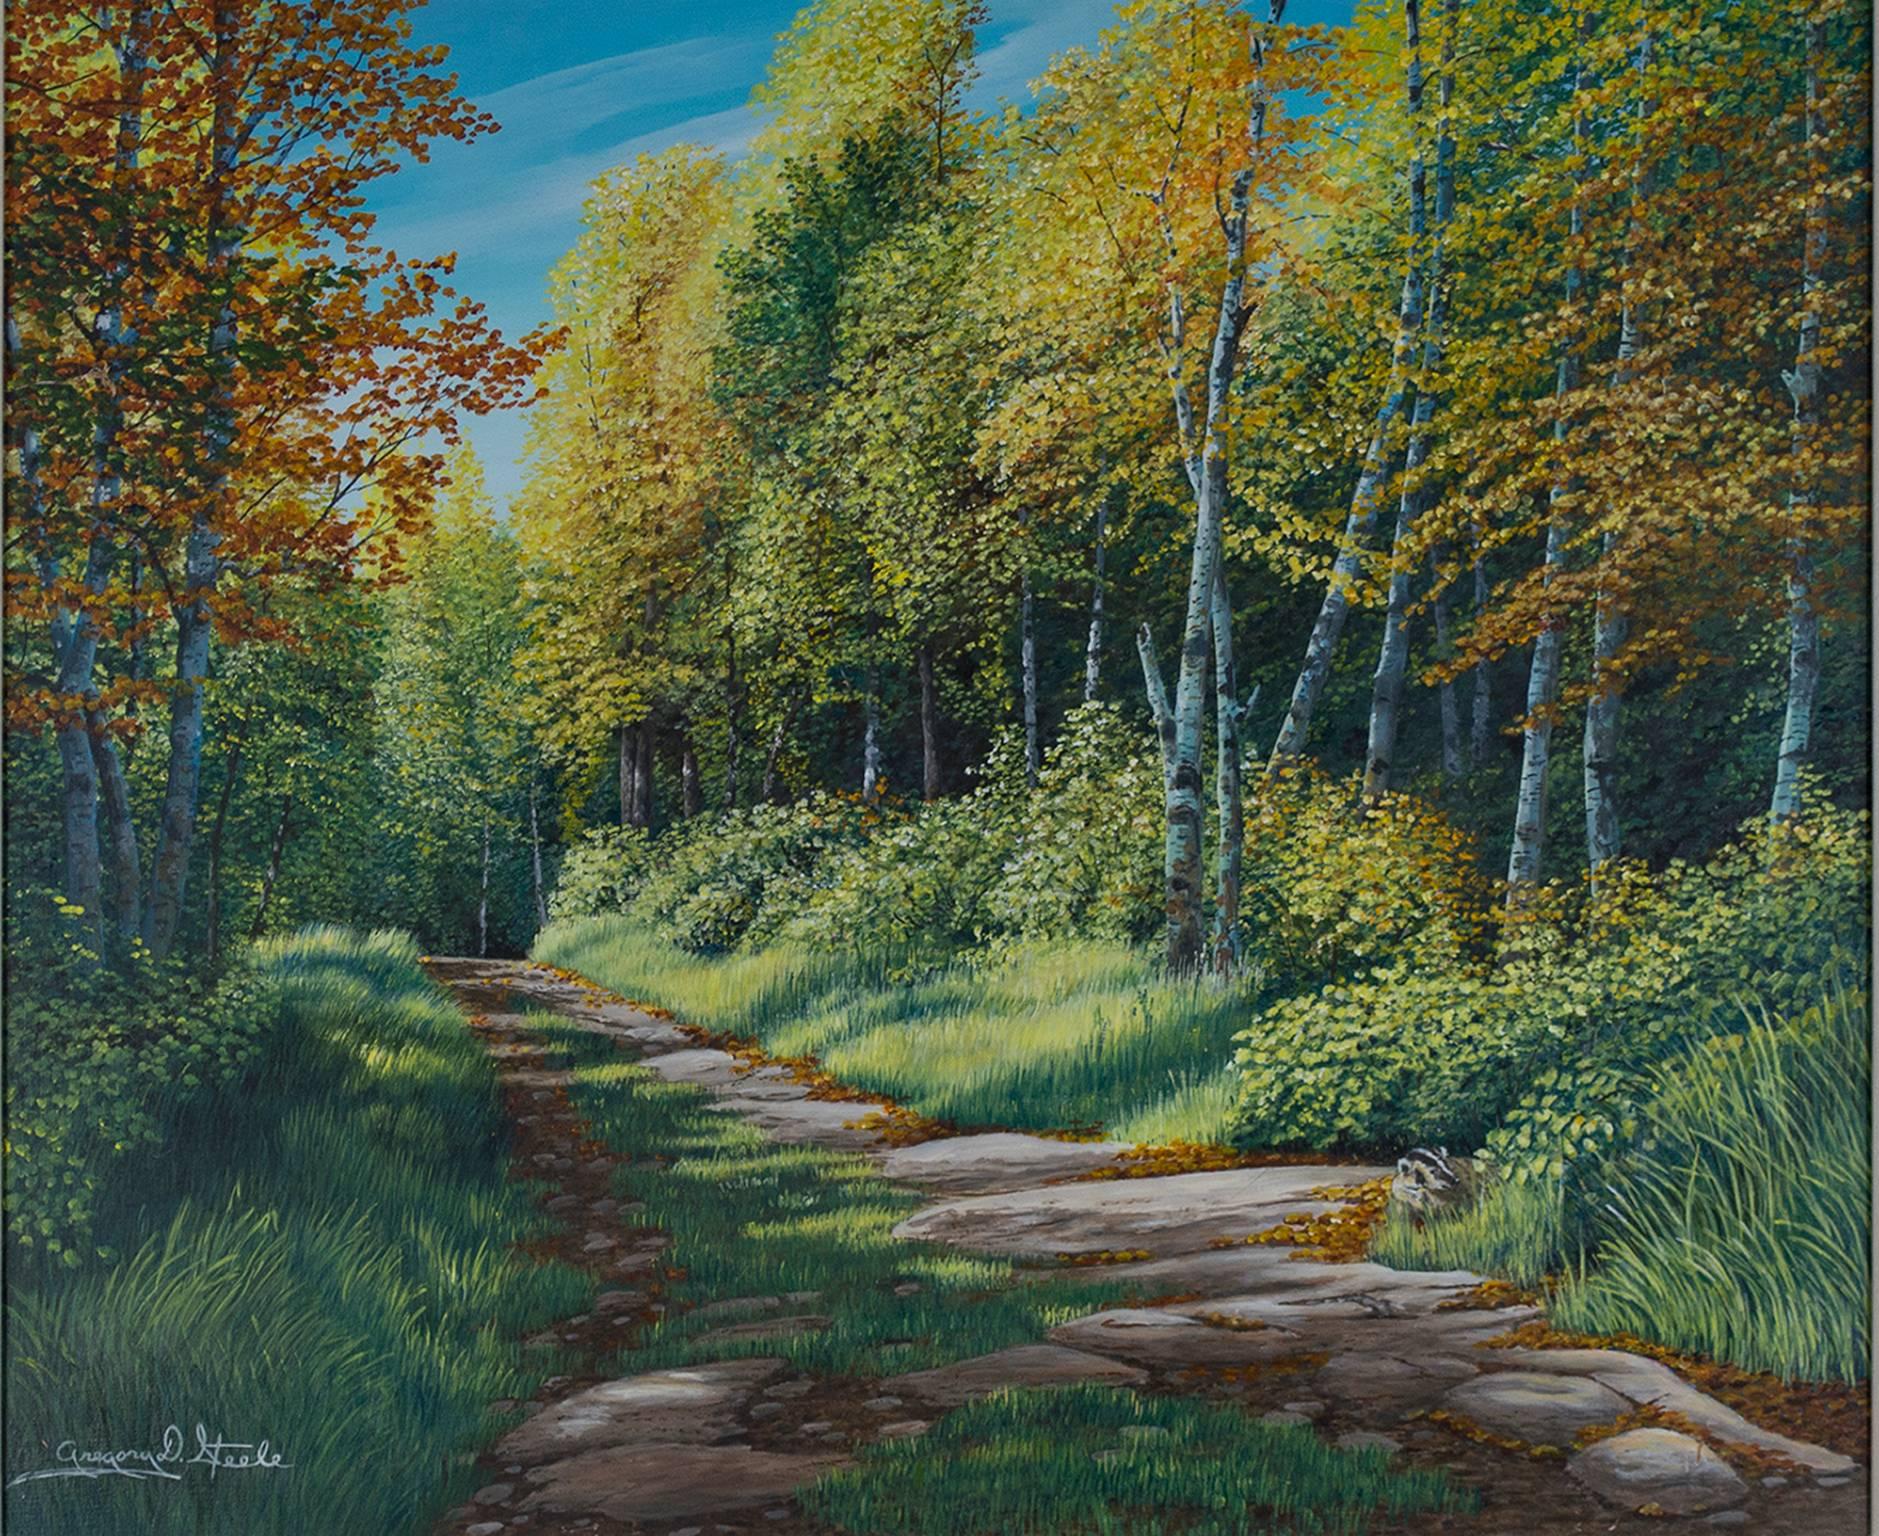 "North Woods Road," Oil on Board Forest Landscape signed by Gregory Steele